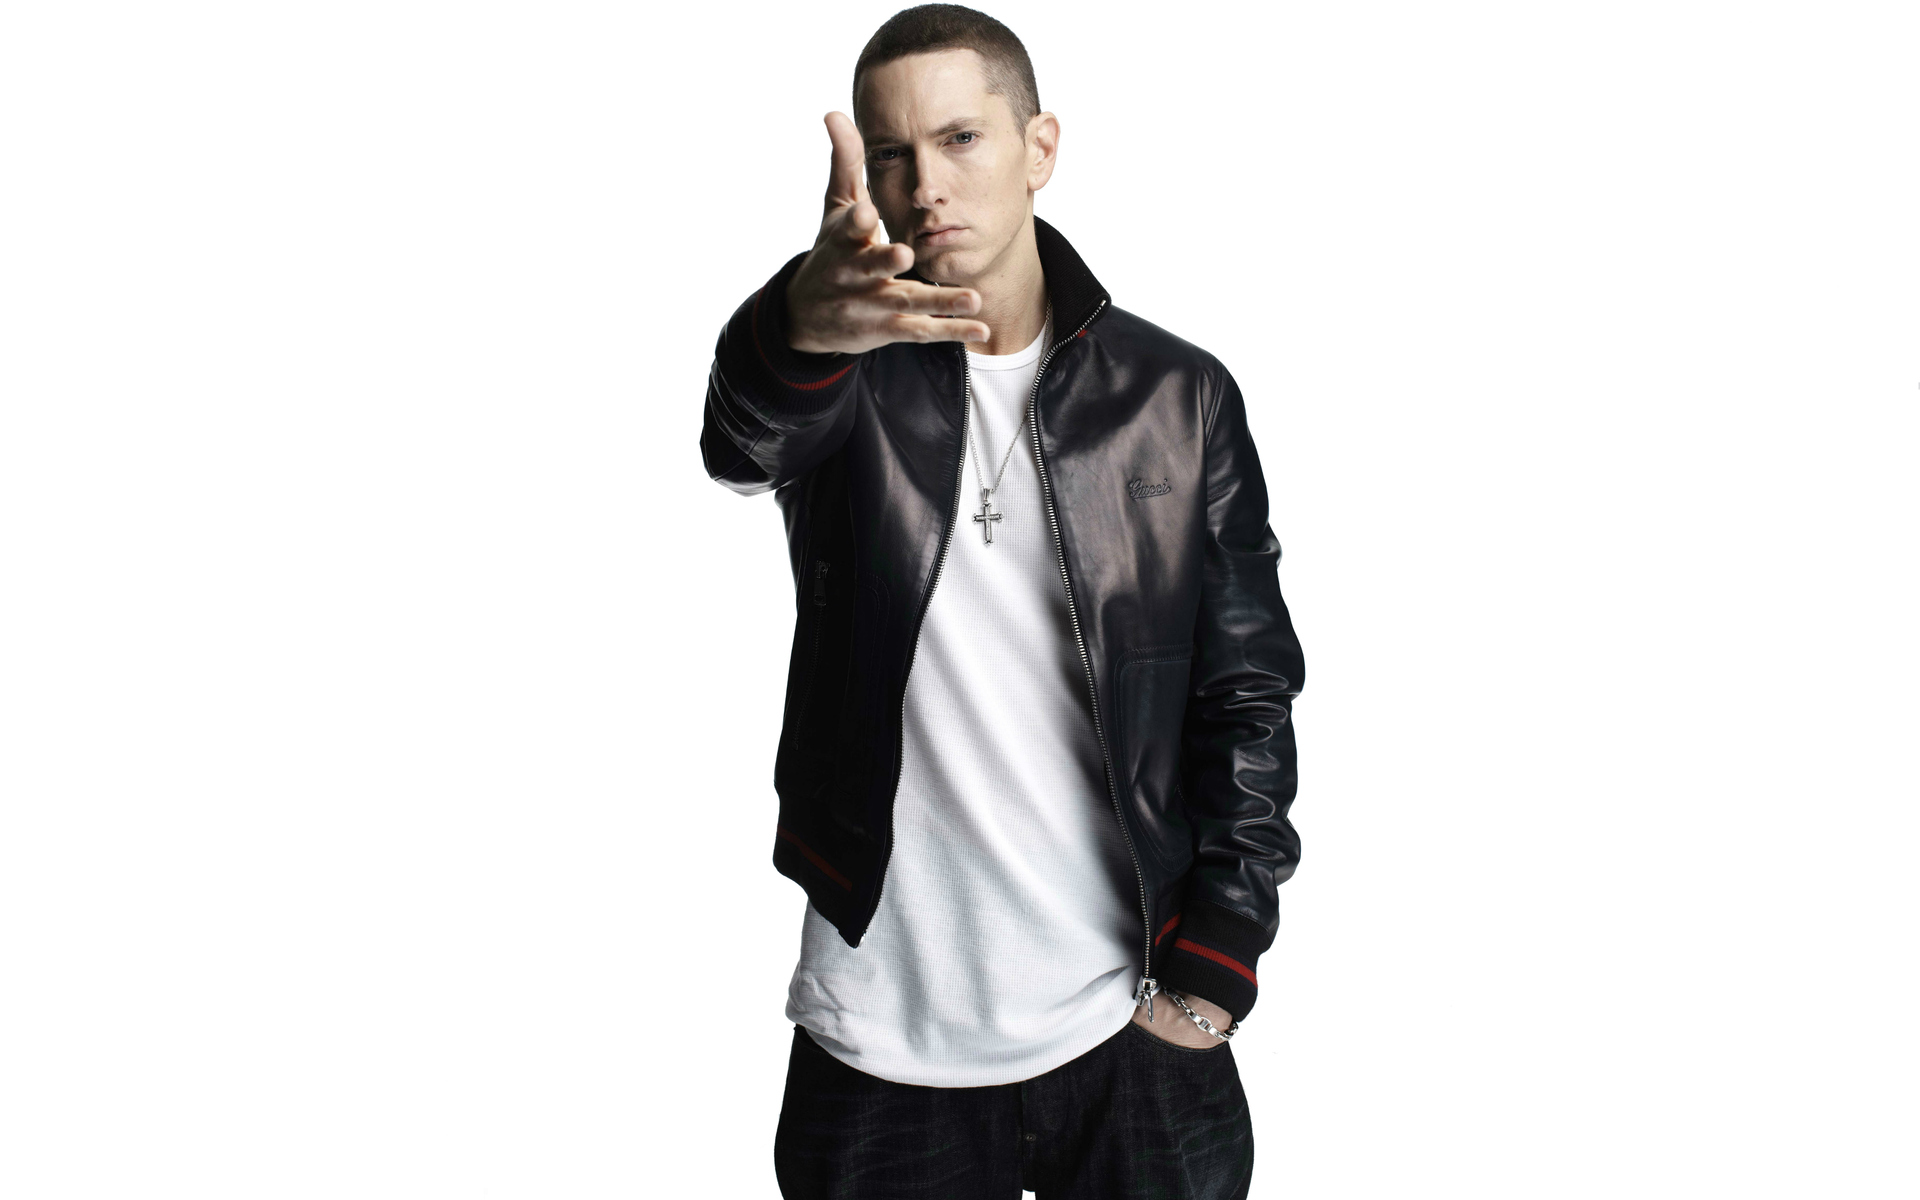 90+ Eminem HD Wallpapers and Backgrounds